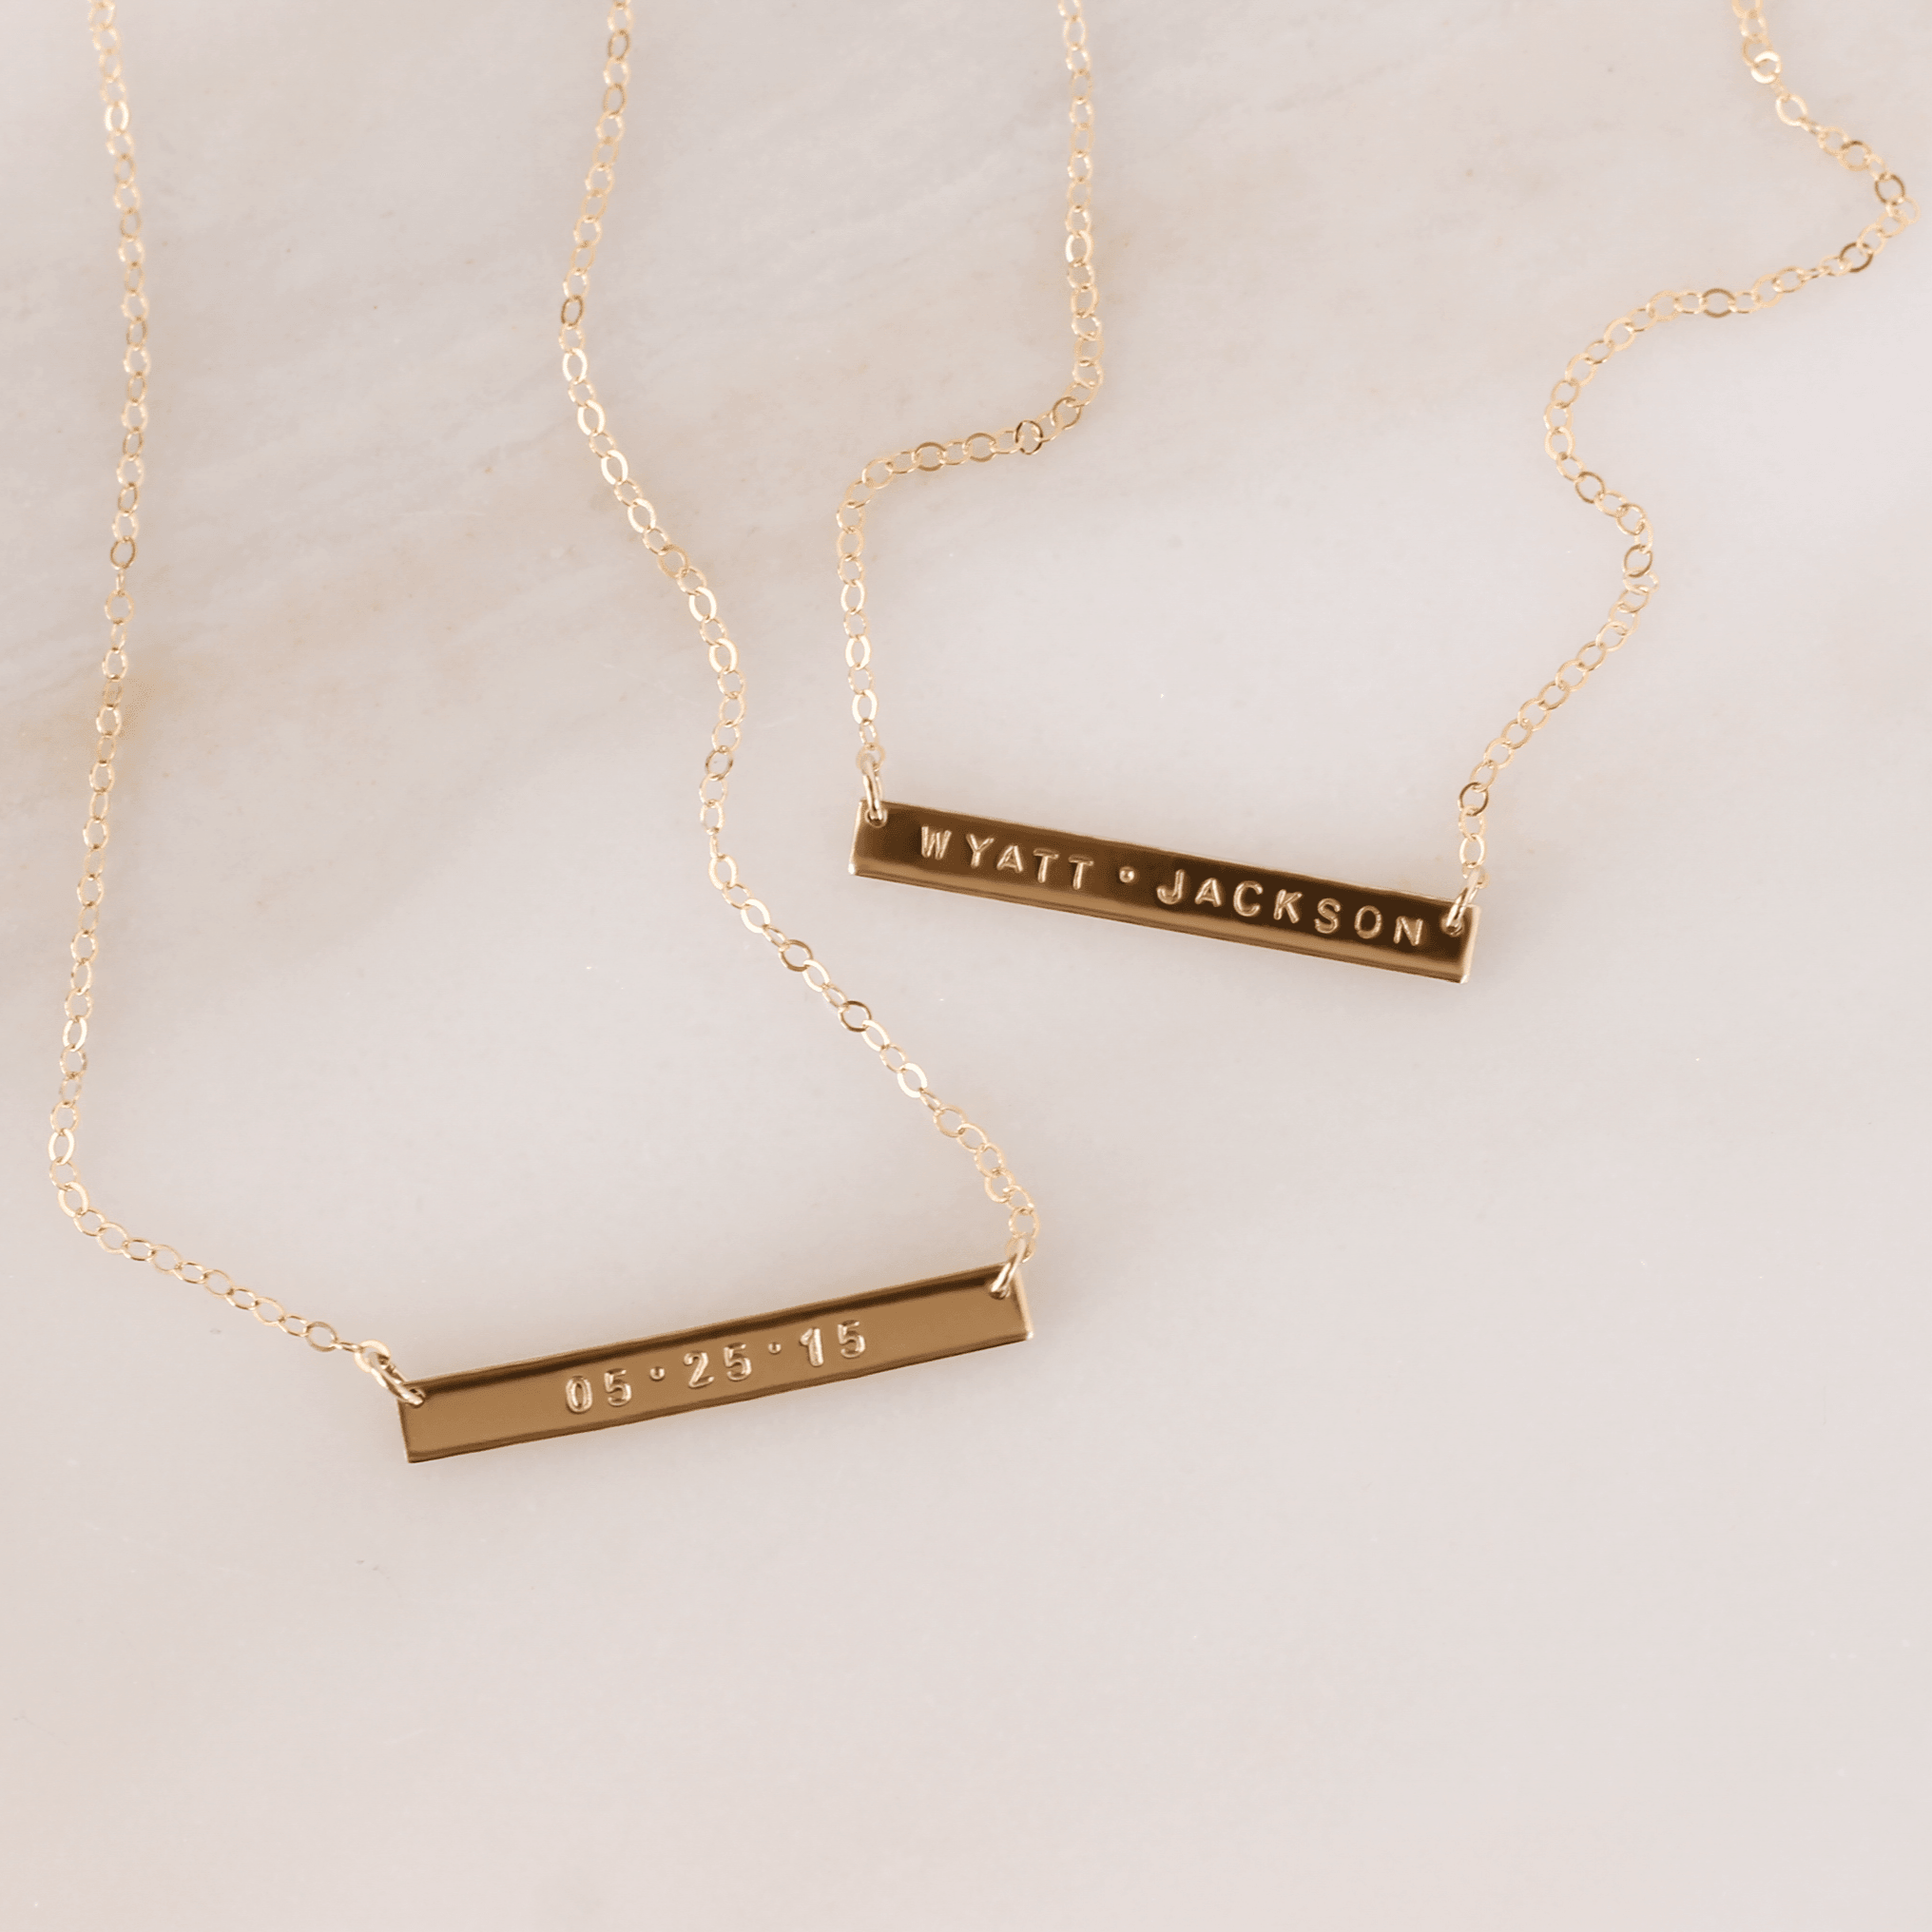 Slim Personalized Bar Necklace - Nolia Jewelry - Meaningful + Sustainably Handcrafted Jewelry